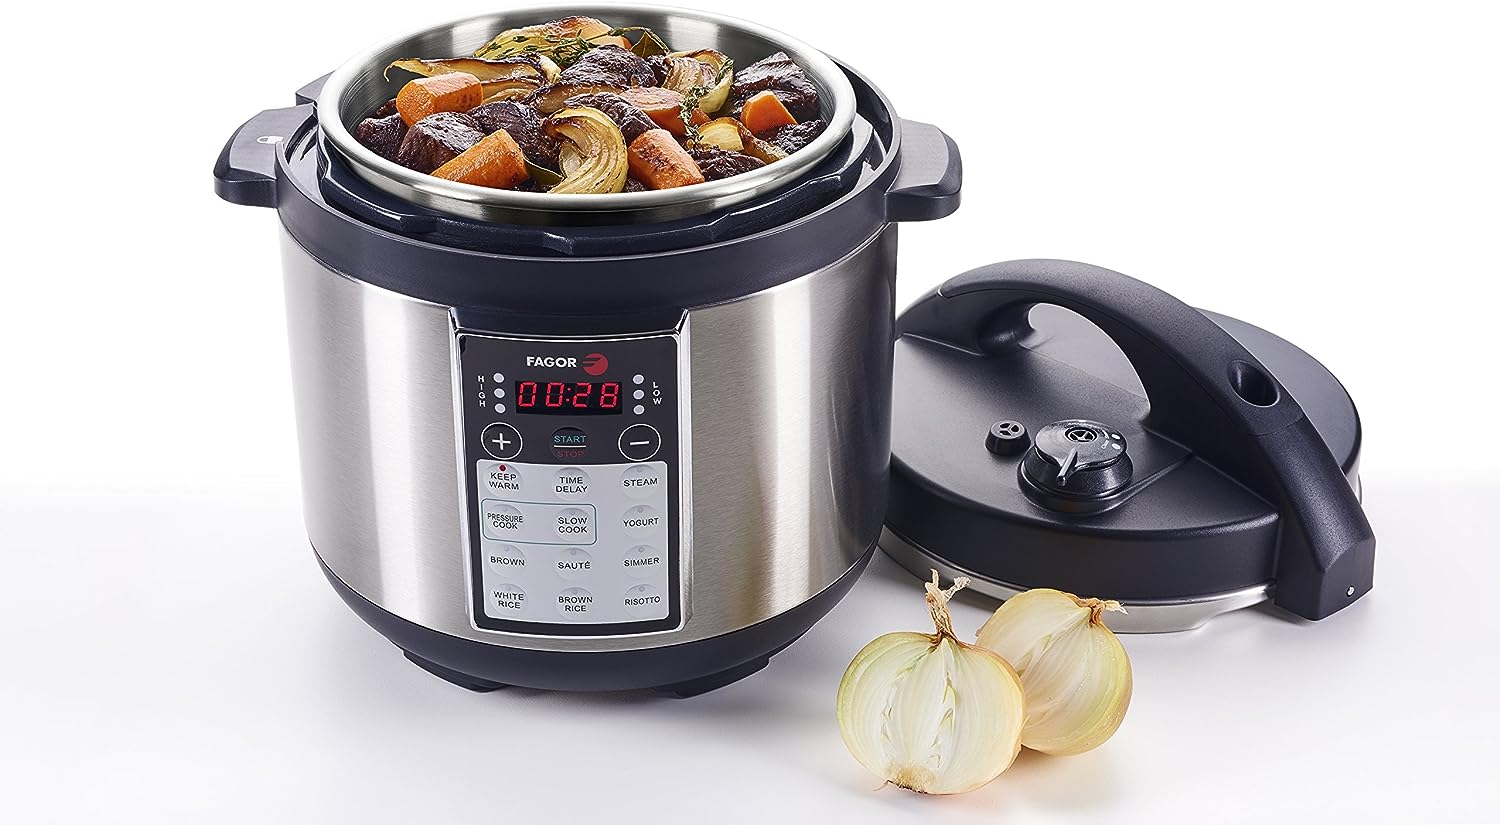 How Can I Tell When Pressure Is Released Fagor Electric Pressure Cooker